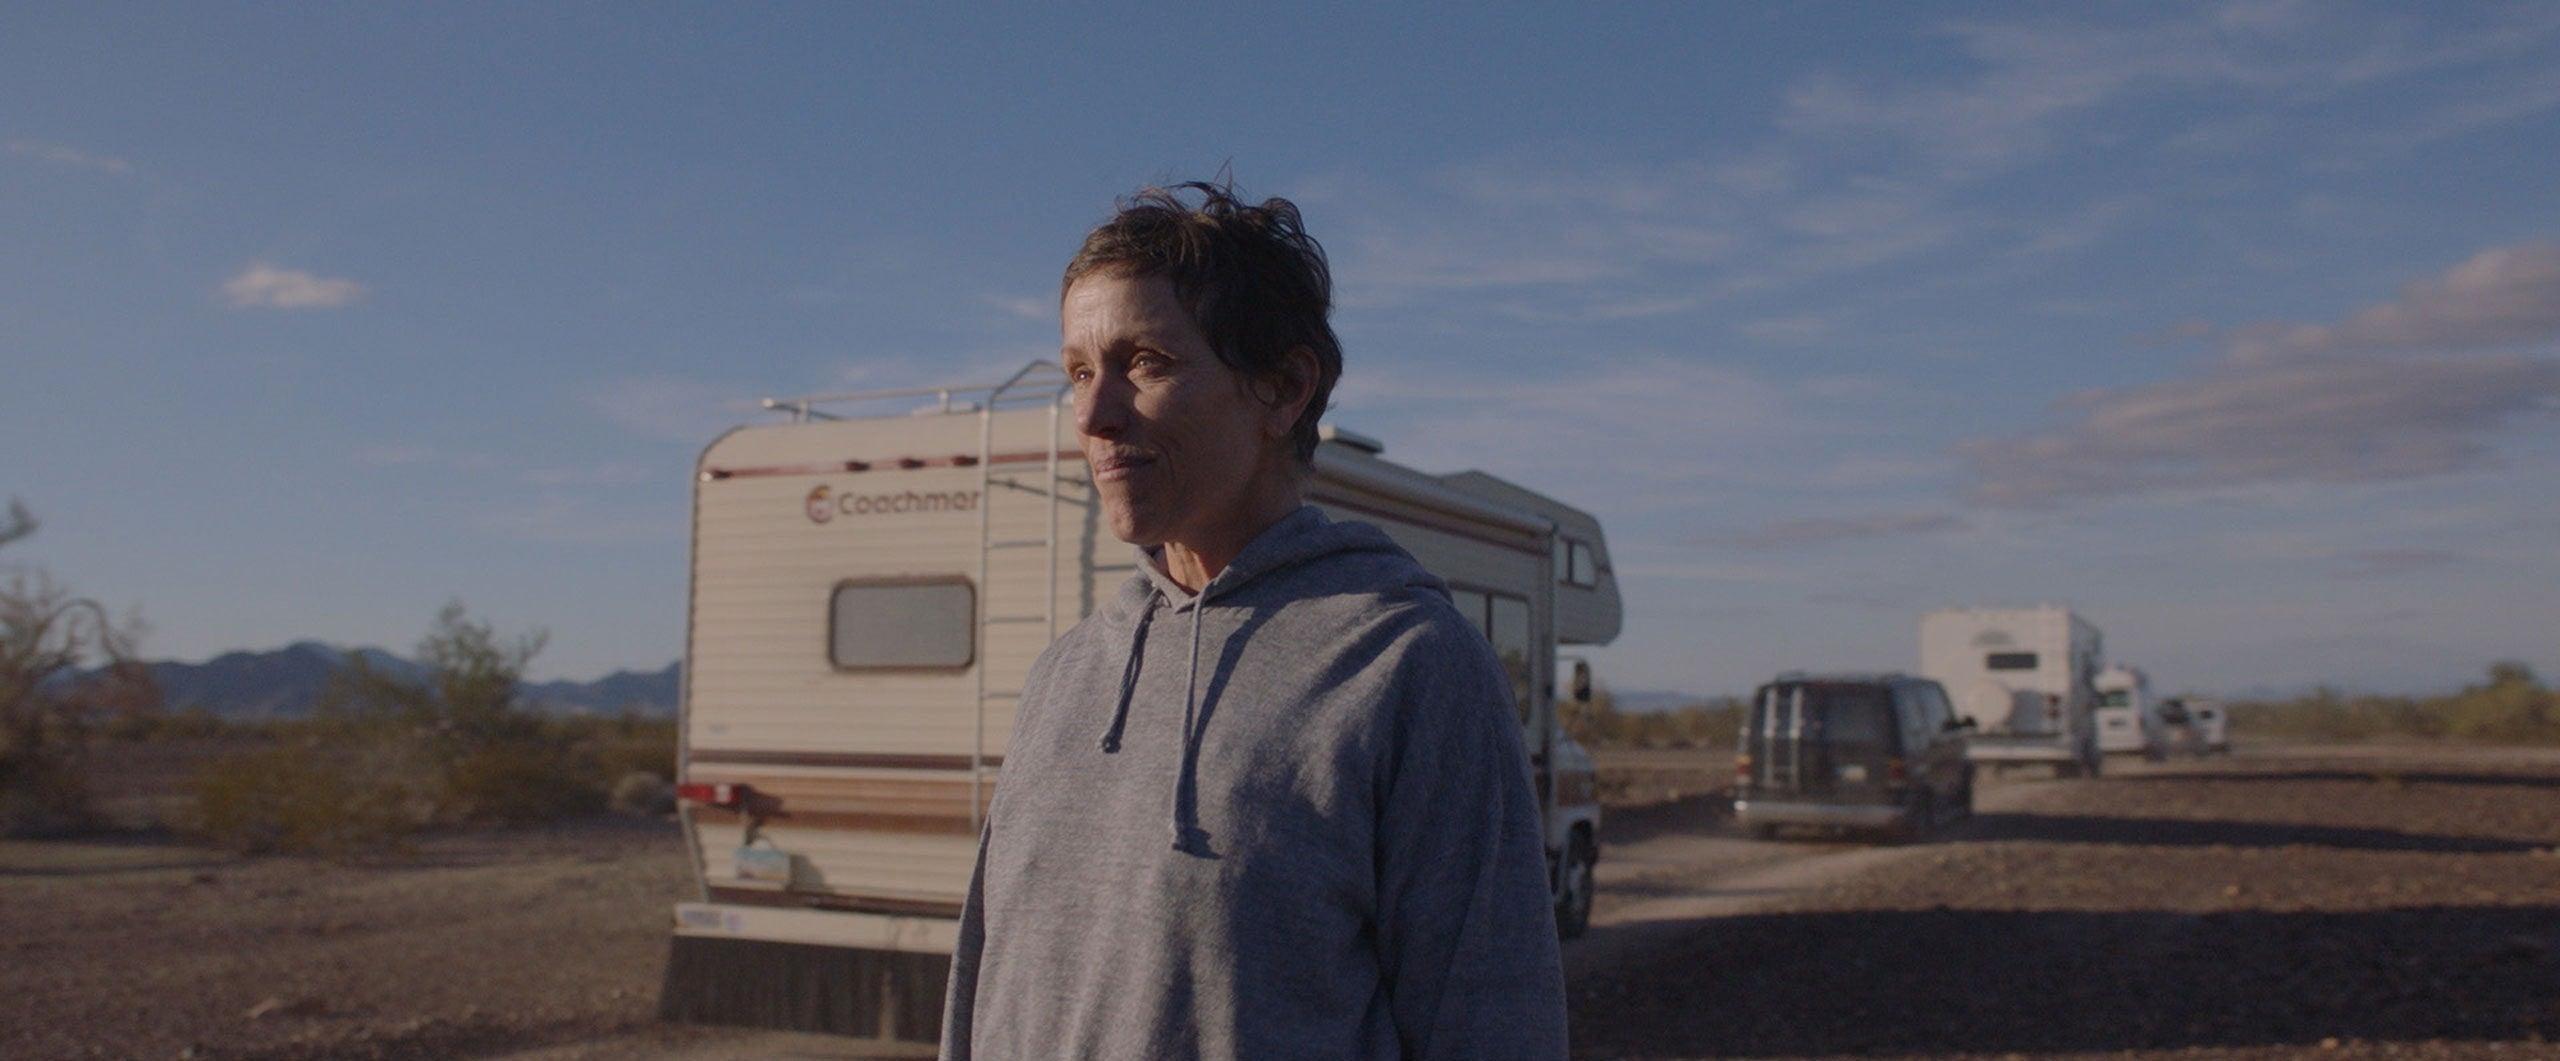 How The Movie "Nomadland" Gives an Honest Glimpse of the Nomad Life - www.icecofreezer.com